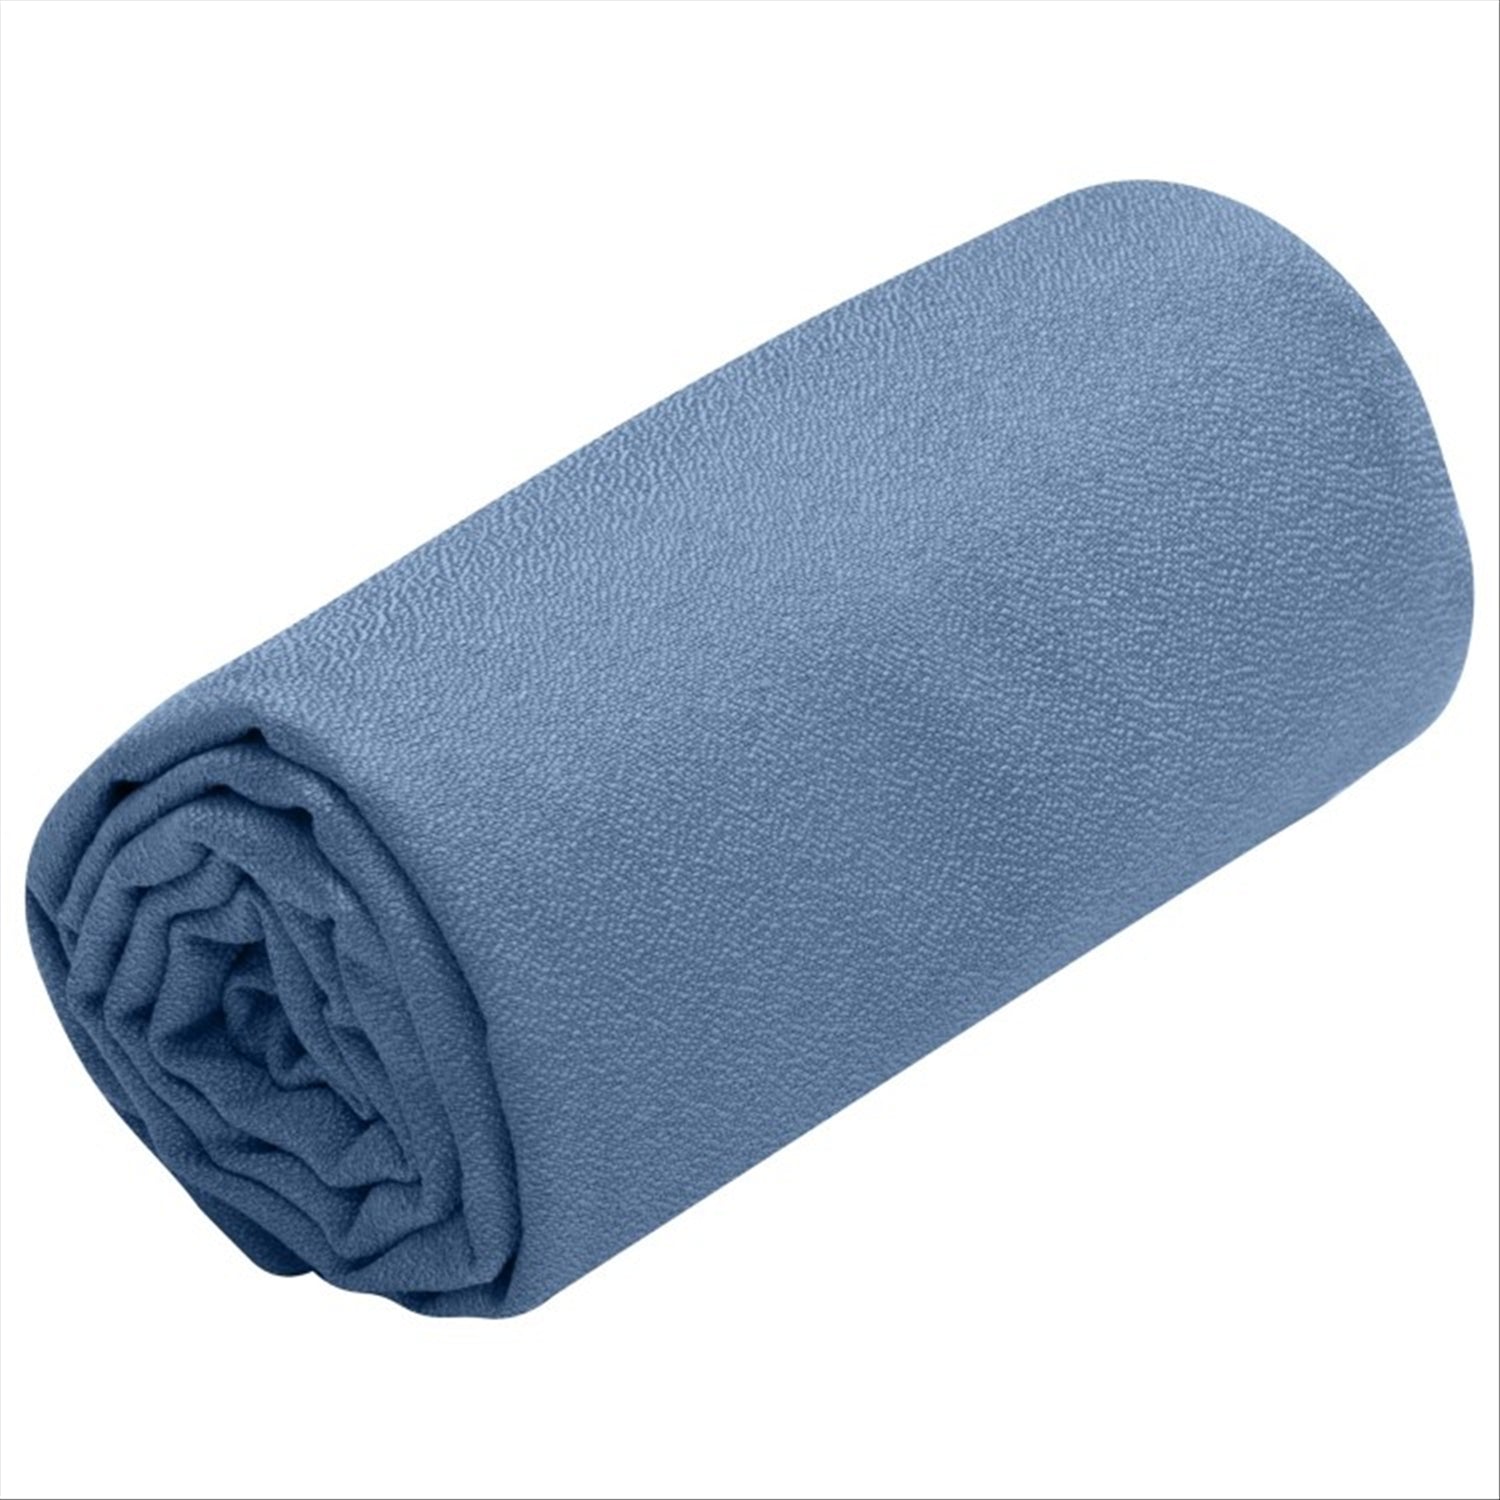 Sea To Summit Ultralight Airlite Towels